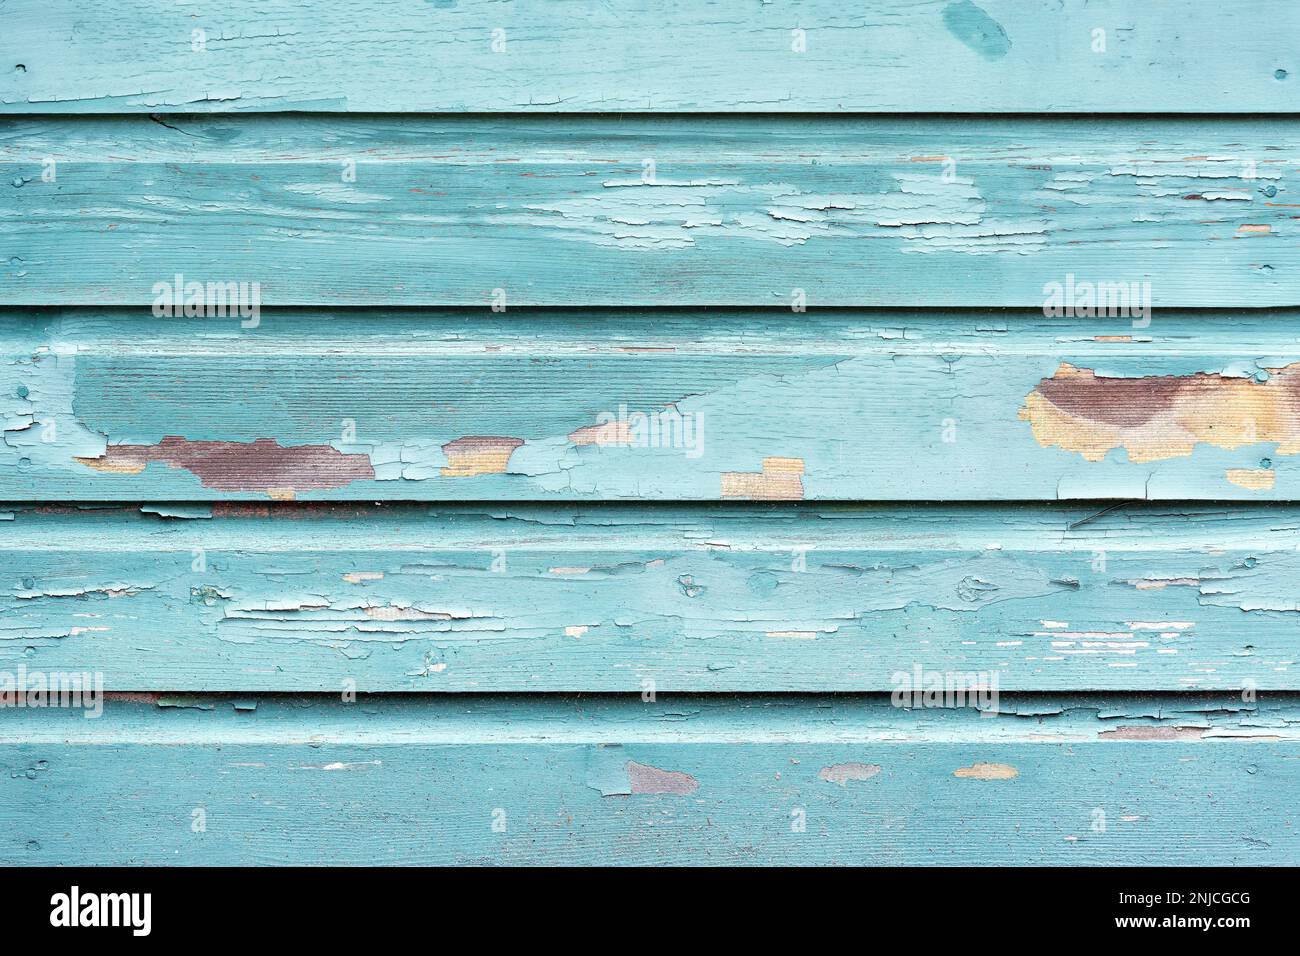 Turquoise housing wooden wall detail, Telegraph Cove, Vancouver Island, British Columbia, Canada. Stock Photo